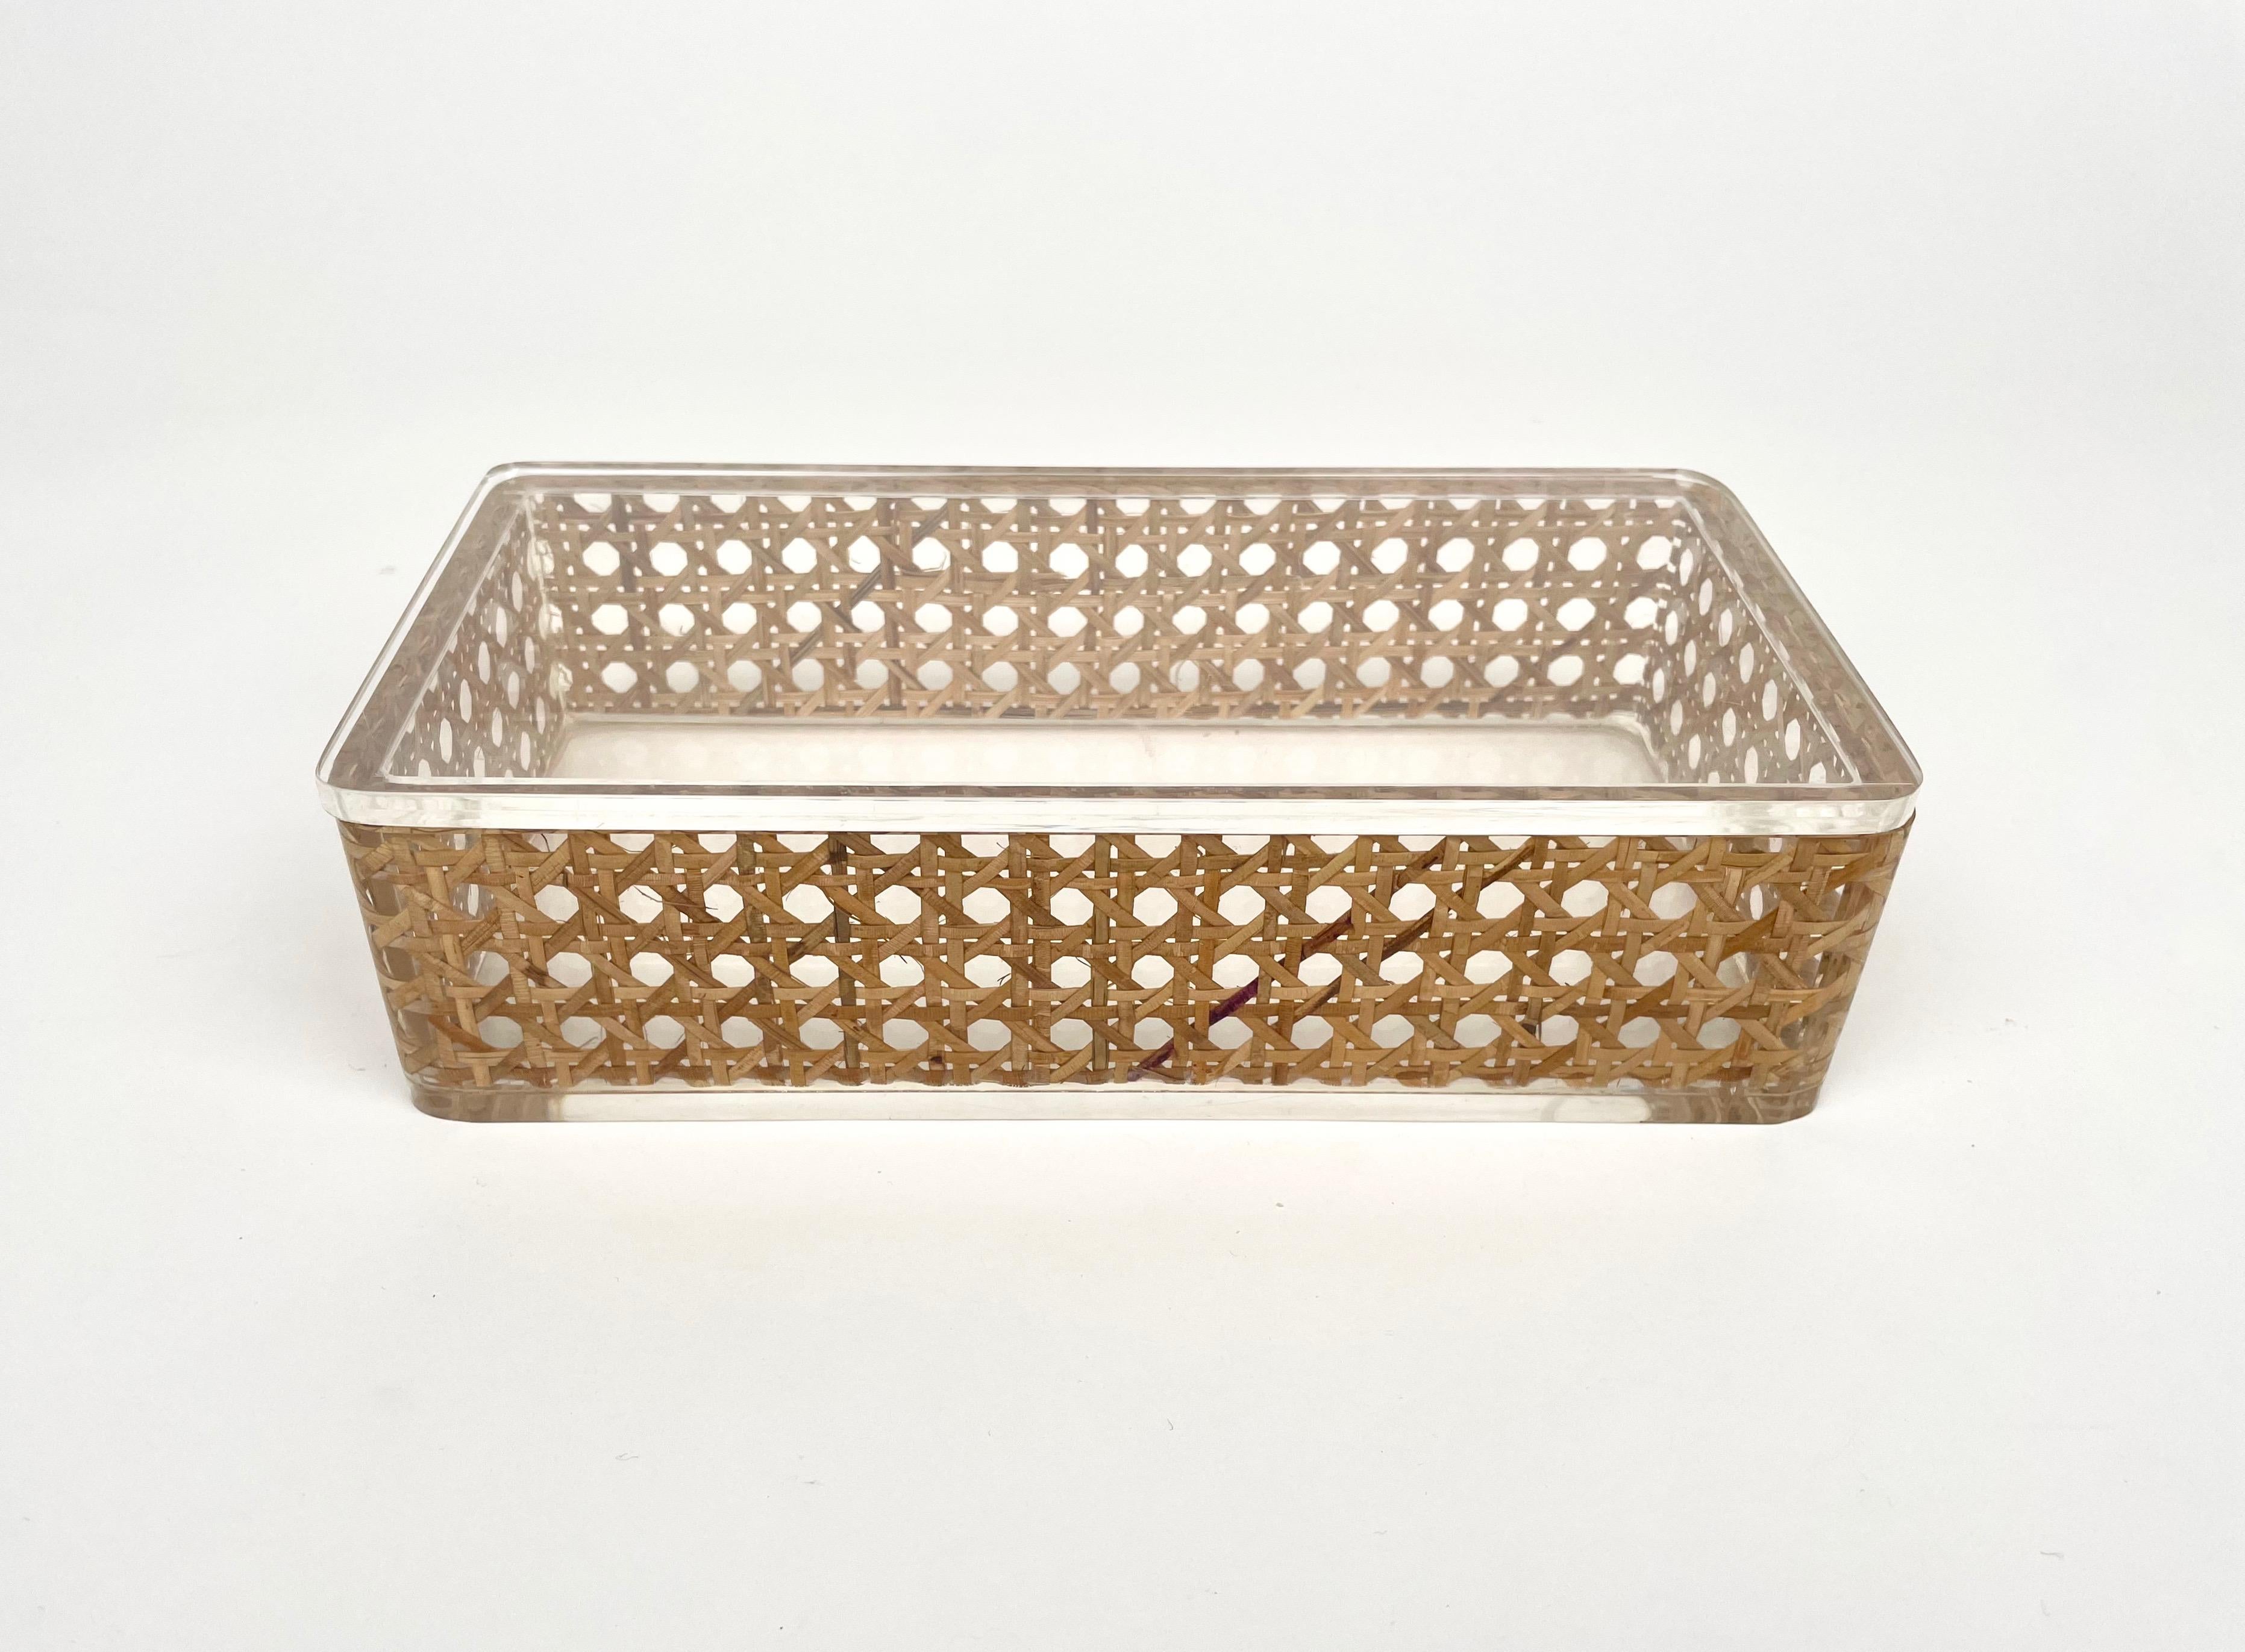 Italian Rectangular Box Lucite and Rattan Christian Dior Home Style, Italy, 1970s